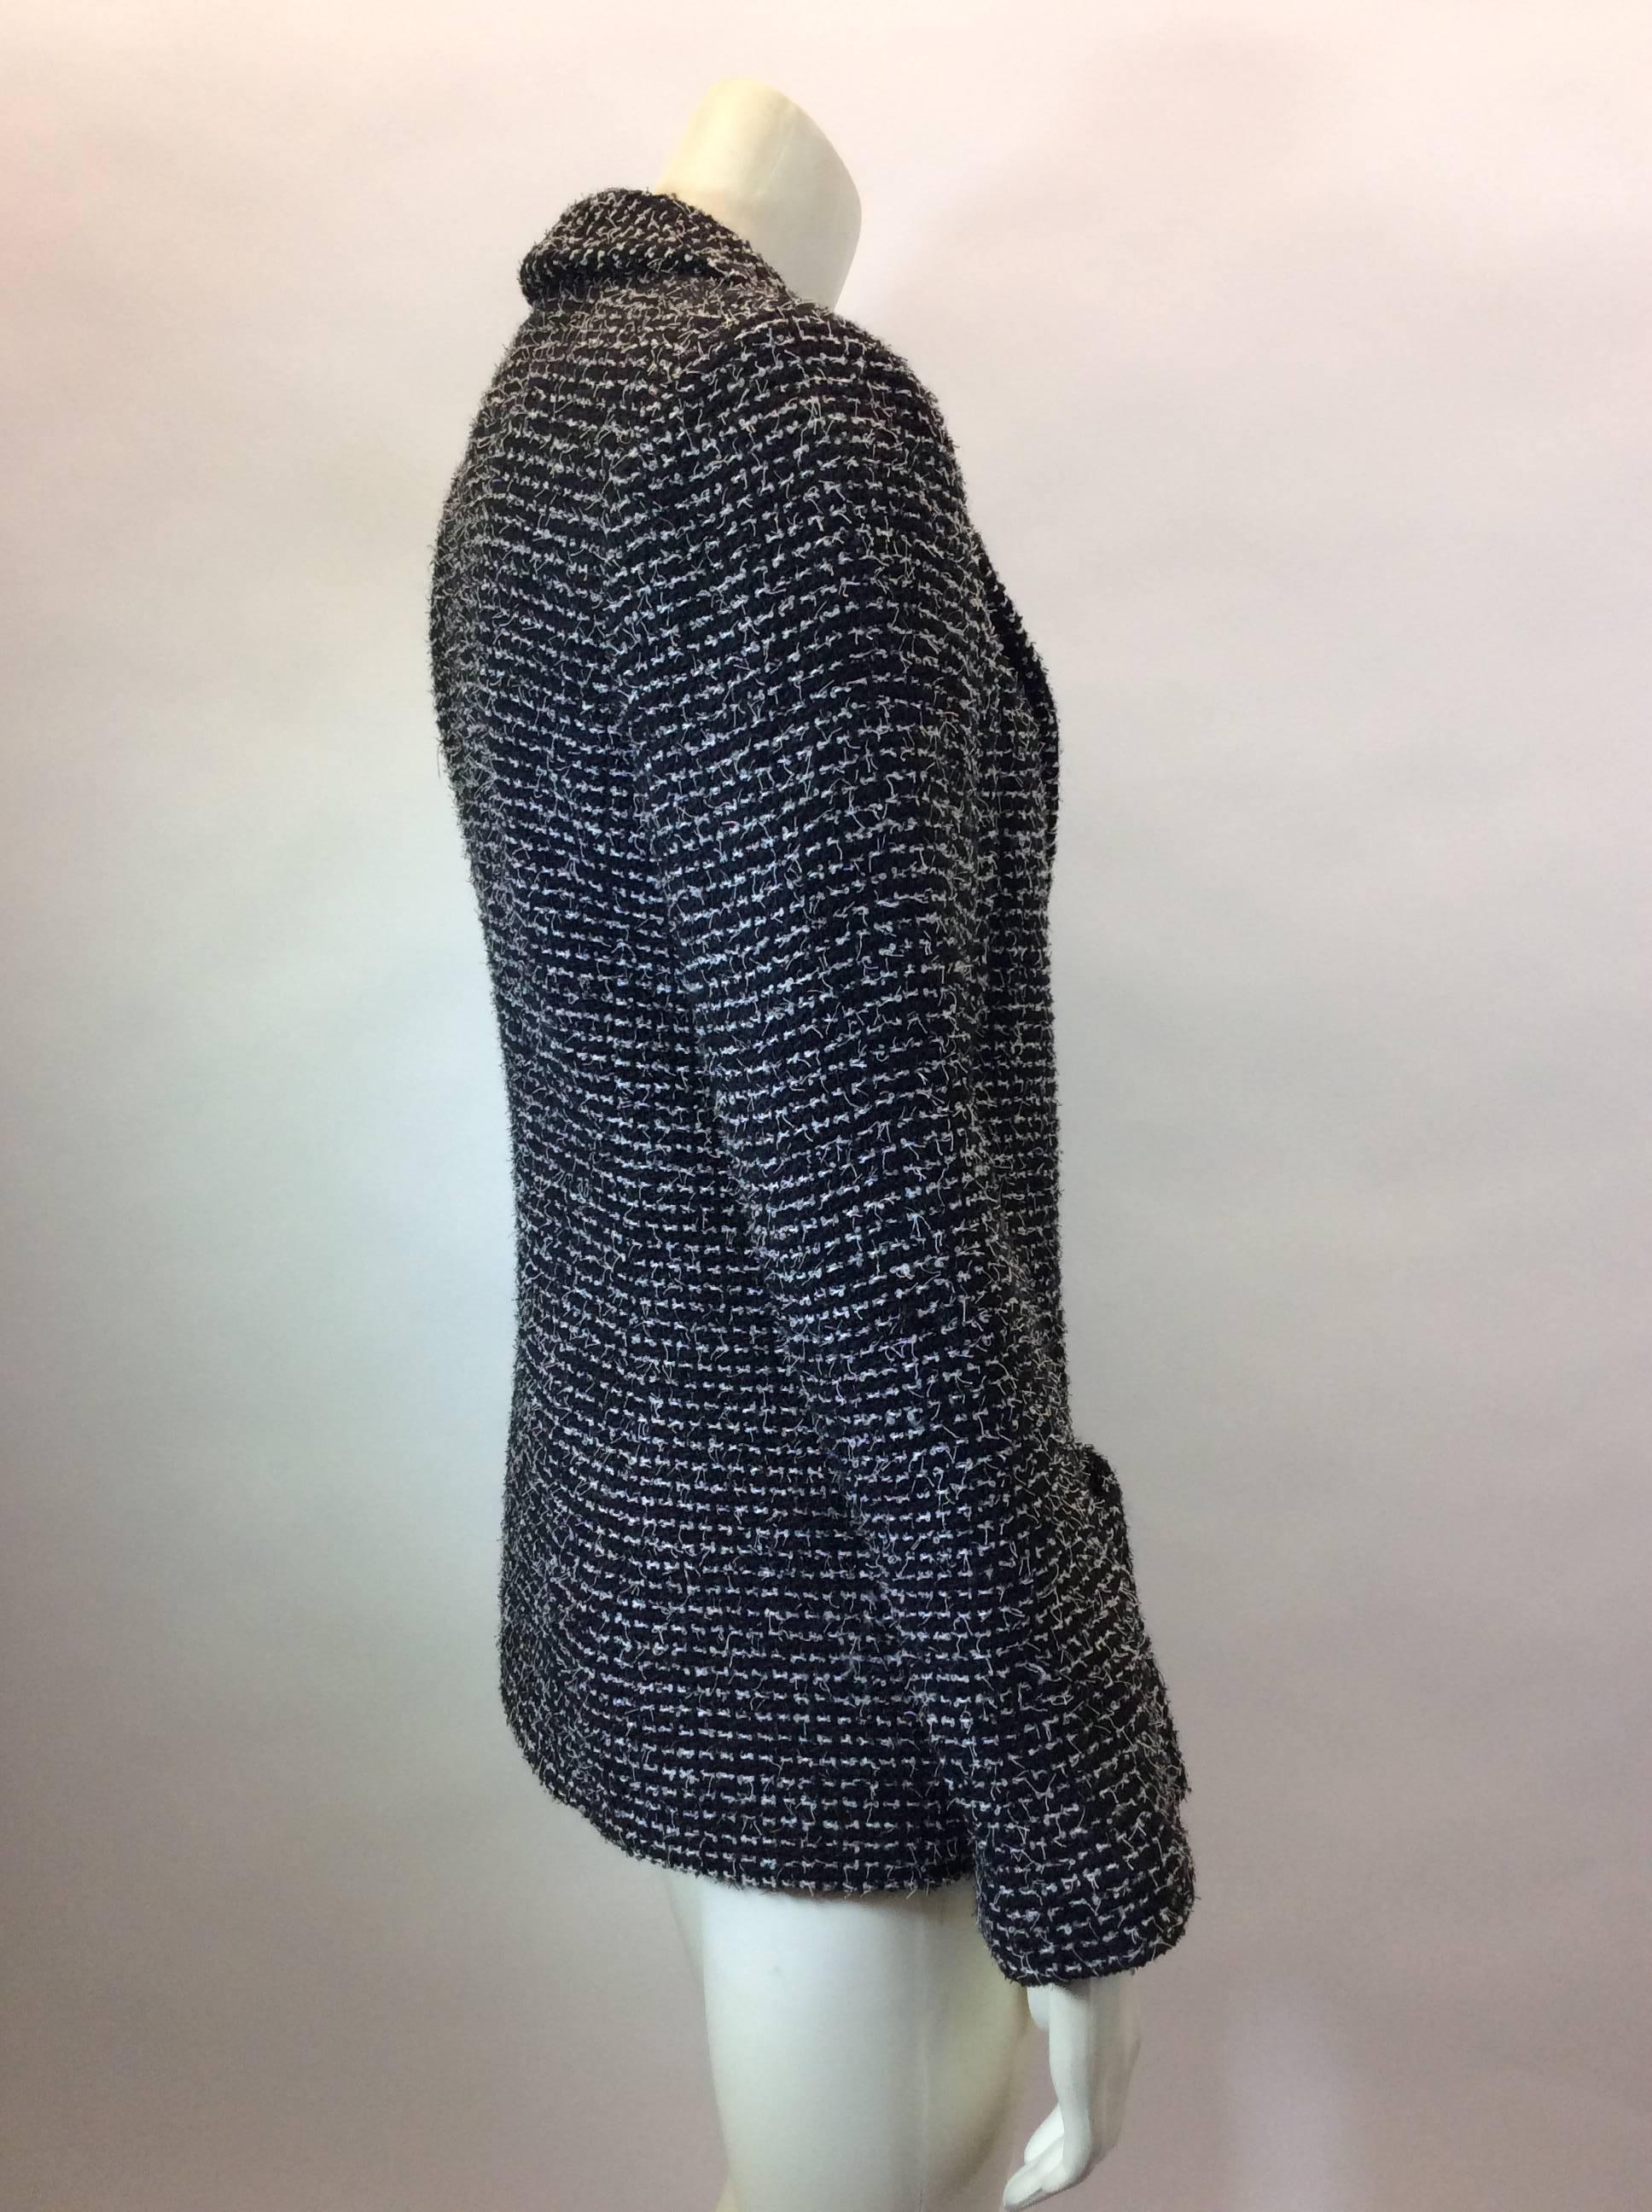 Chanel Black Tweed Jacket In Excellent Condition For Sale In Narberth, PA